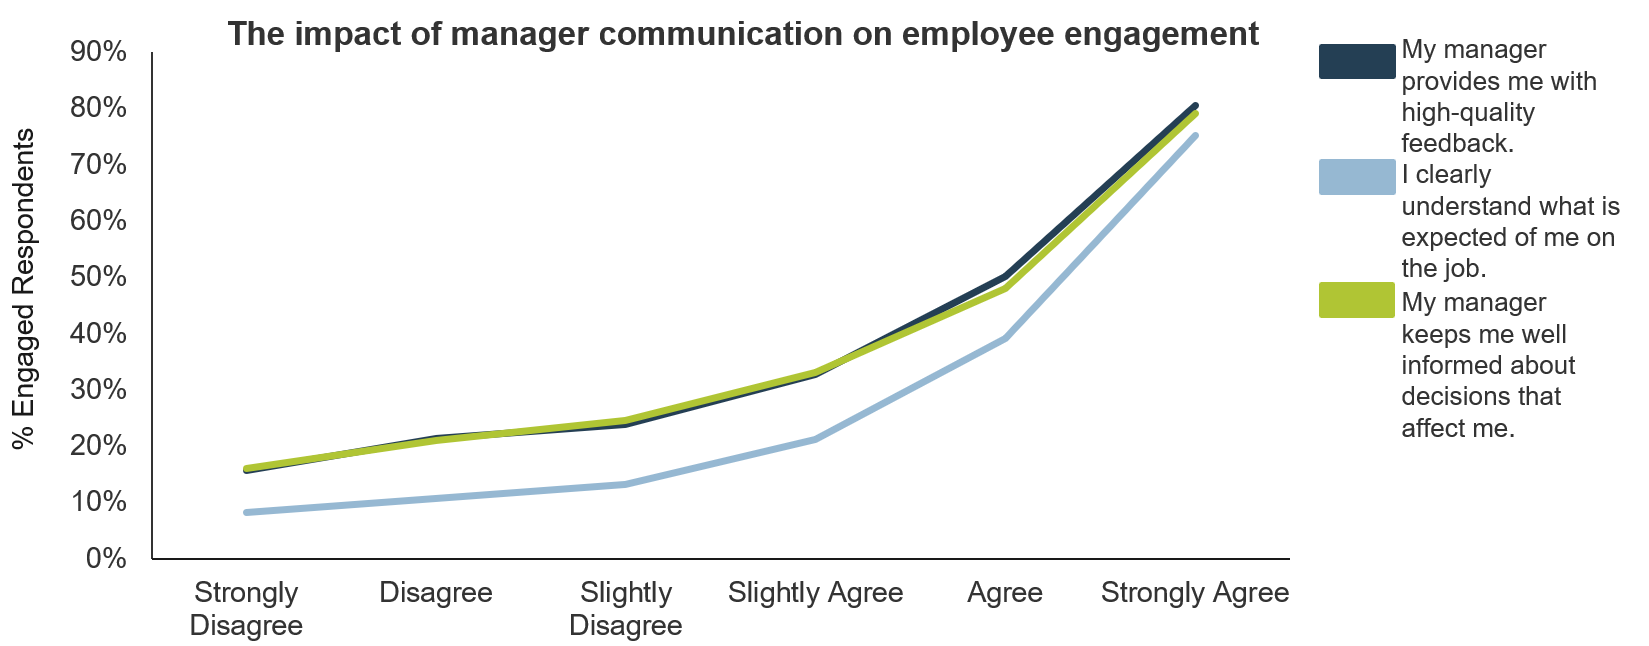 A line graph titled: The impact of manager communication on employee engagement. The X-axis is labeled from Strongly Disagree to Strongly Agree, and the Y-axis is labeled: Percent of Engaged Respondents. There are 3 colour-coded lines: dark blue indicates My manager provides me with high-quality feedback; light blue indicates I clearly understand what is expected of me on the job; and green indicates My manager keeps me well informed about decisions that affect me. The line turns upward as it moves to the right of the graph.